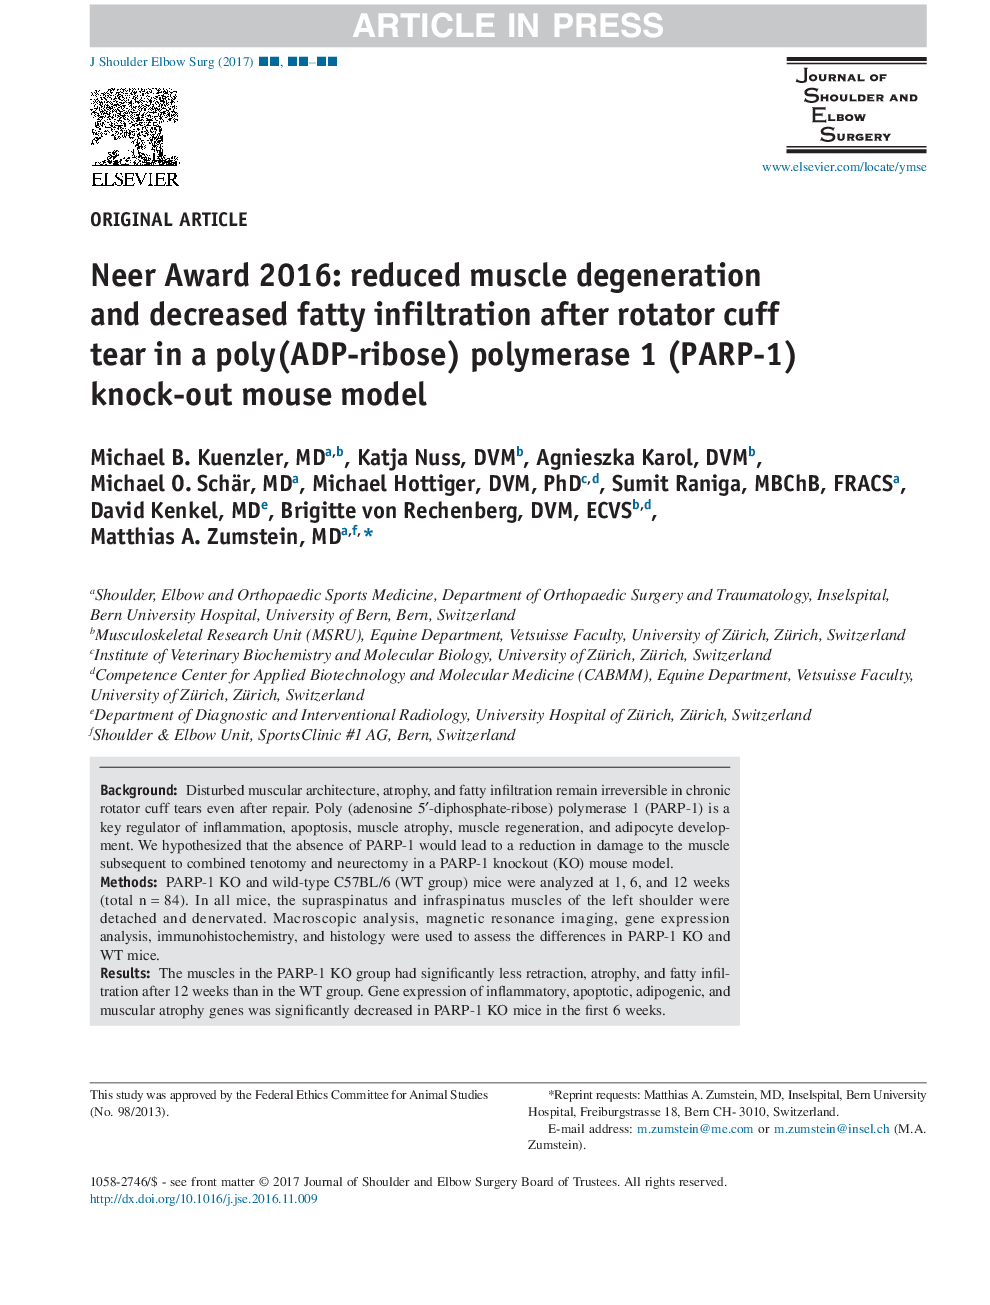 Neer Award 2016: reduced muscle degeneration and decreased fatty infiltration after rotator cuff tear in a poly(ADP-ribose) polymerase 1 (PARP-1) knock-out mouse model